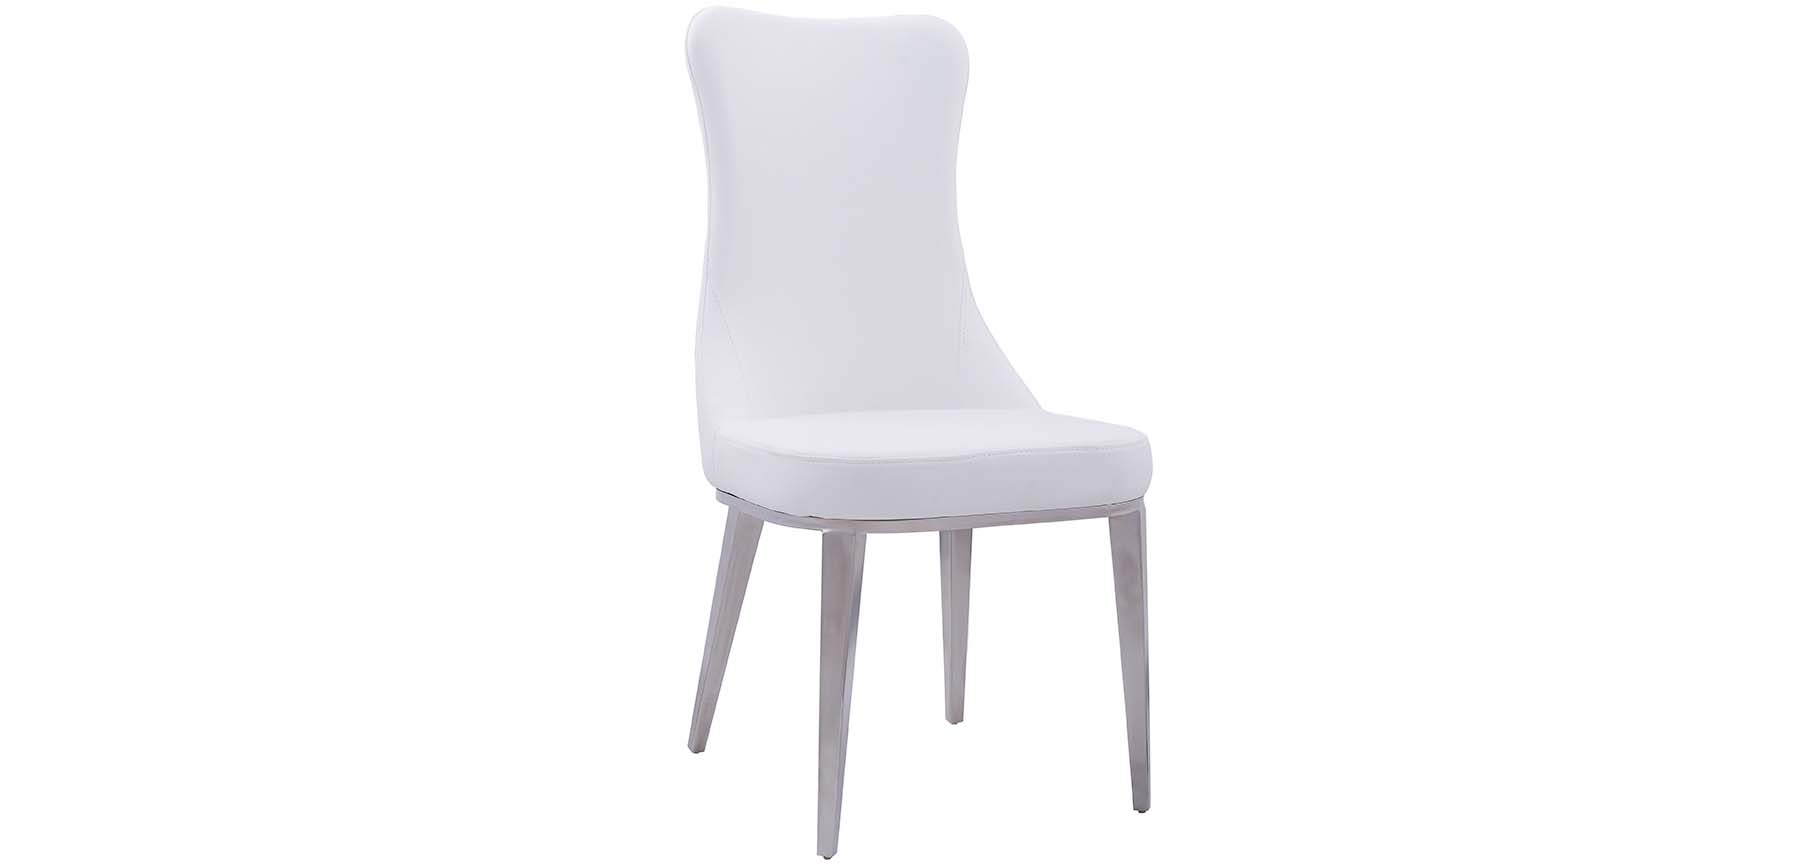 Dining Room Furniture Swivel Chairs 6138 Solid White (no pattern) Chair